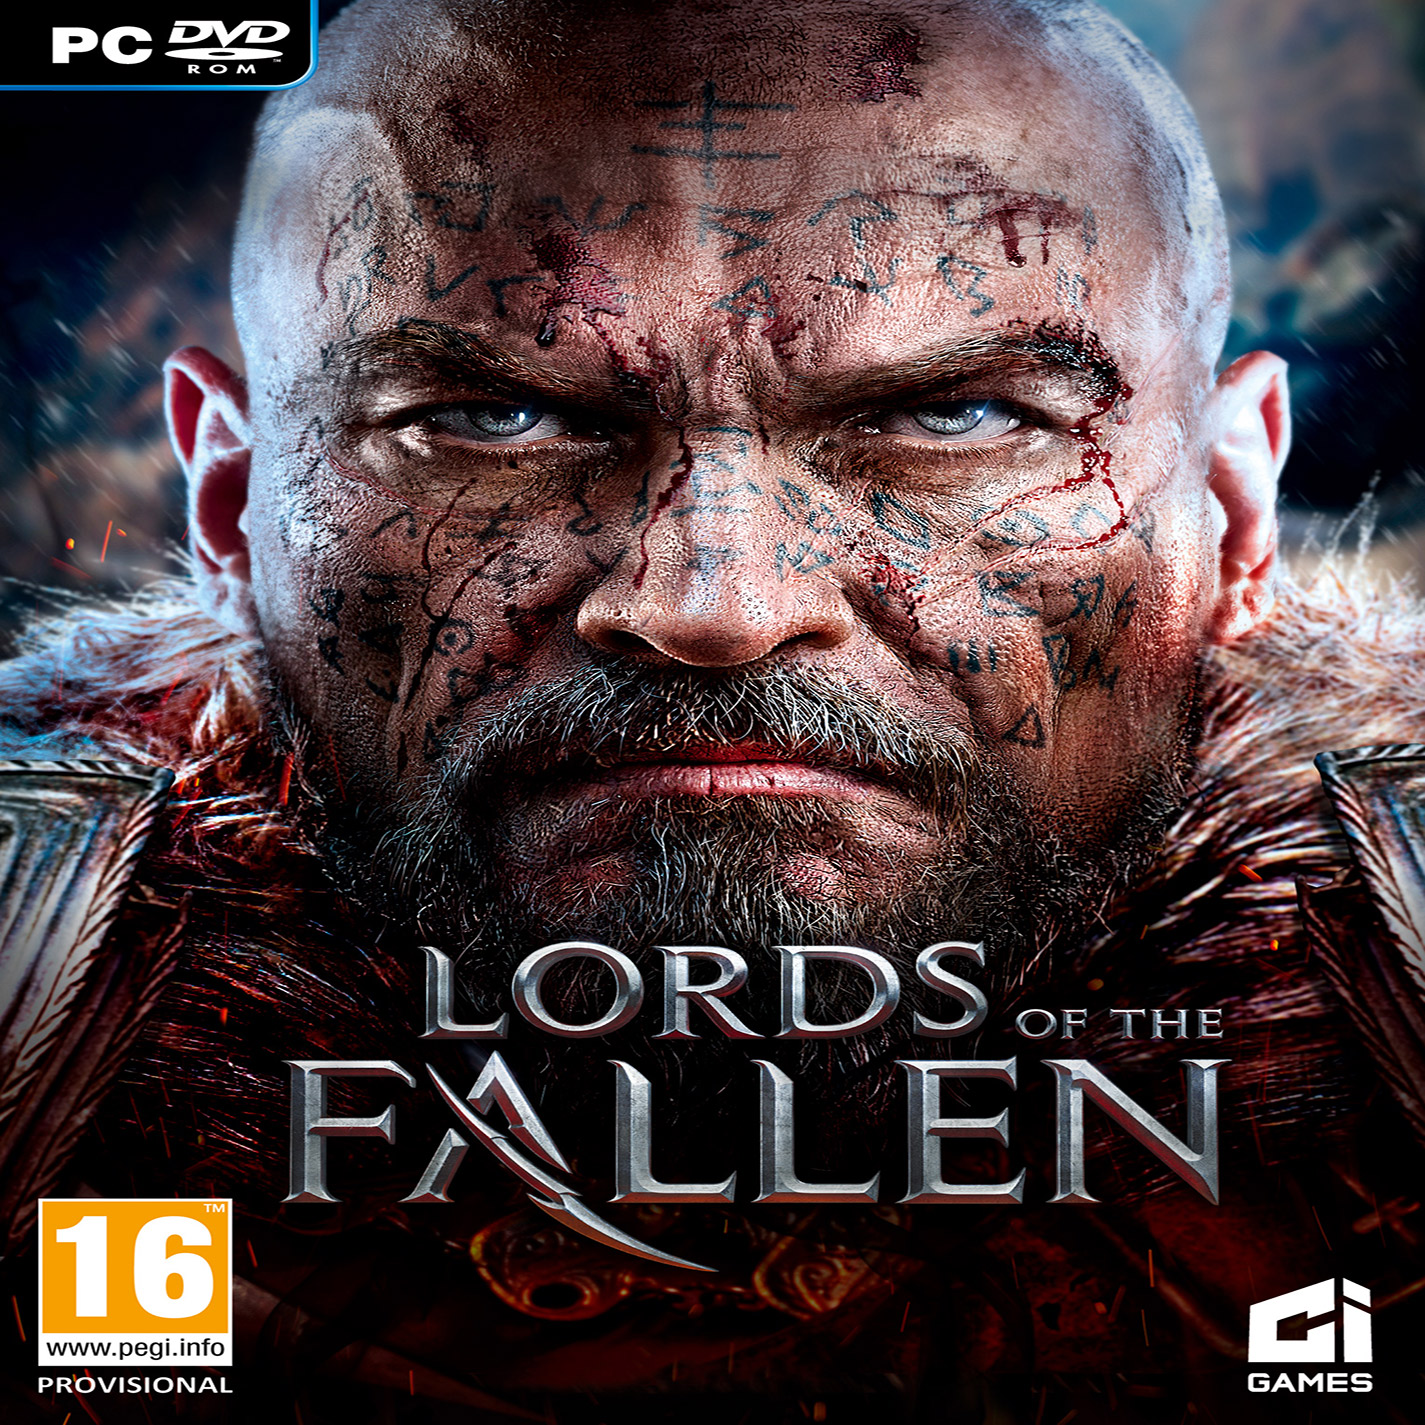 Lords of the Fallen (2014) - pedn CD obal